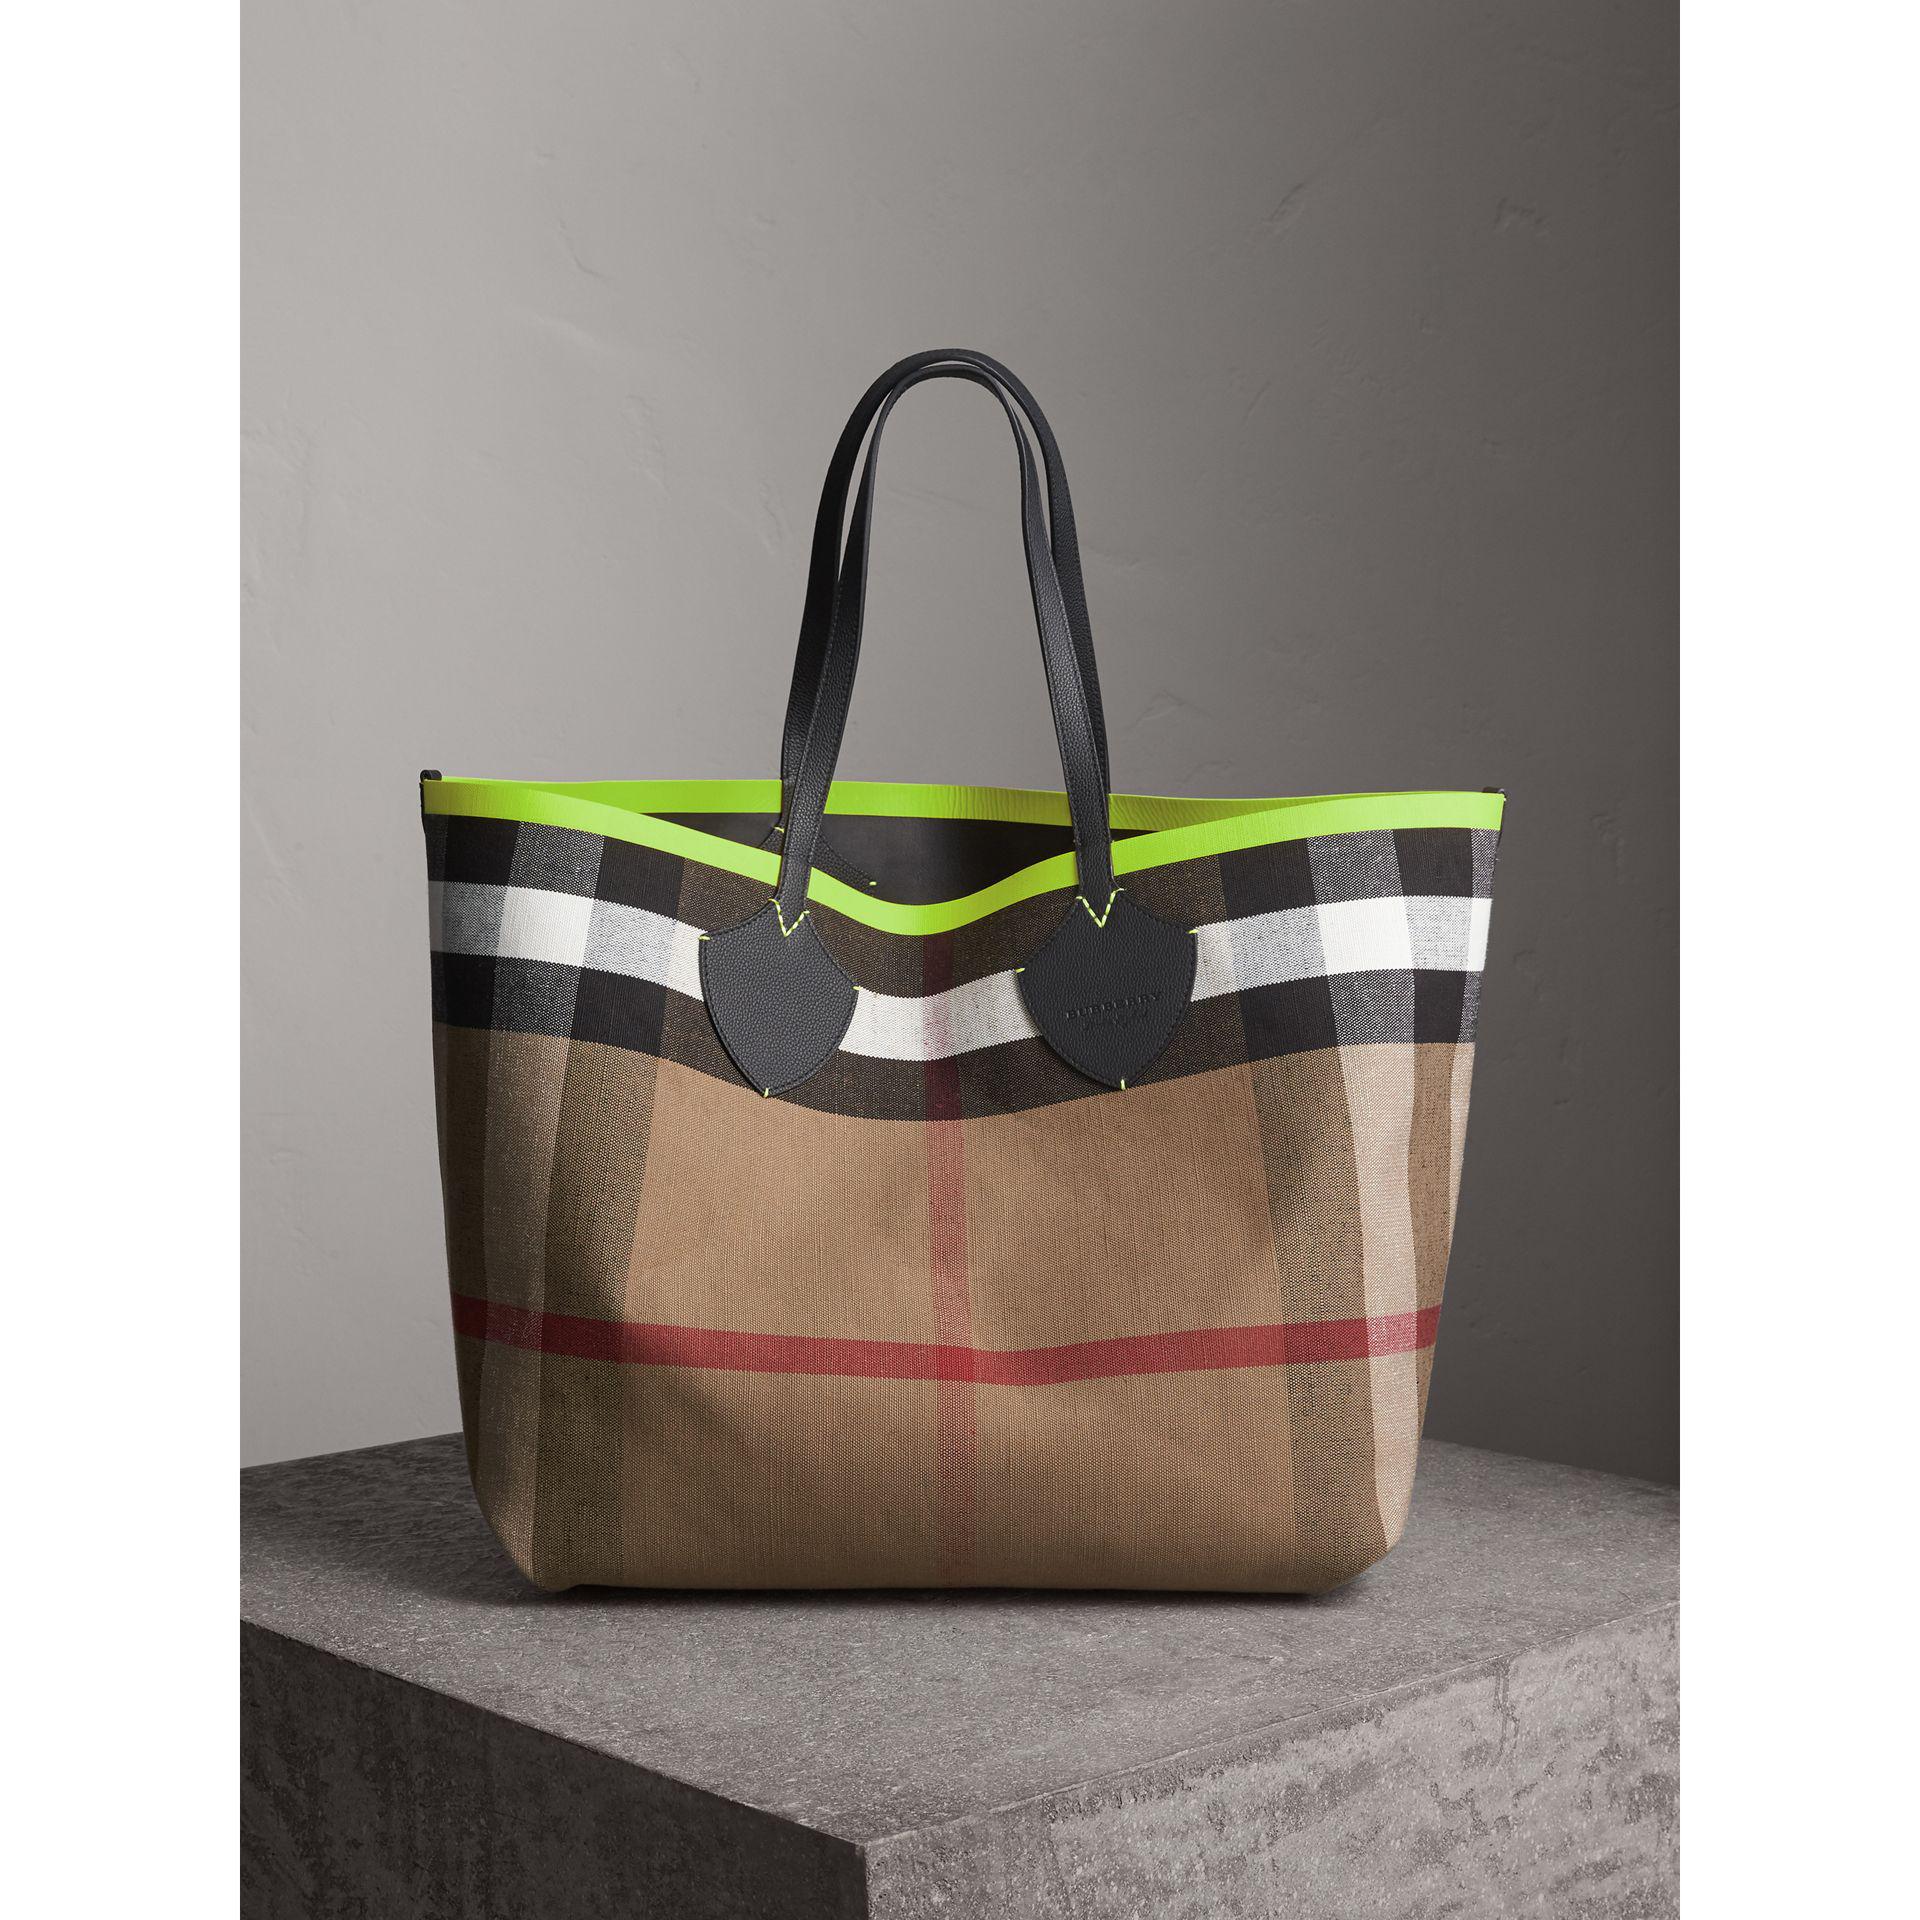 Burberry Giant Vintage Check Reversible Tote Bag in brown nylon